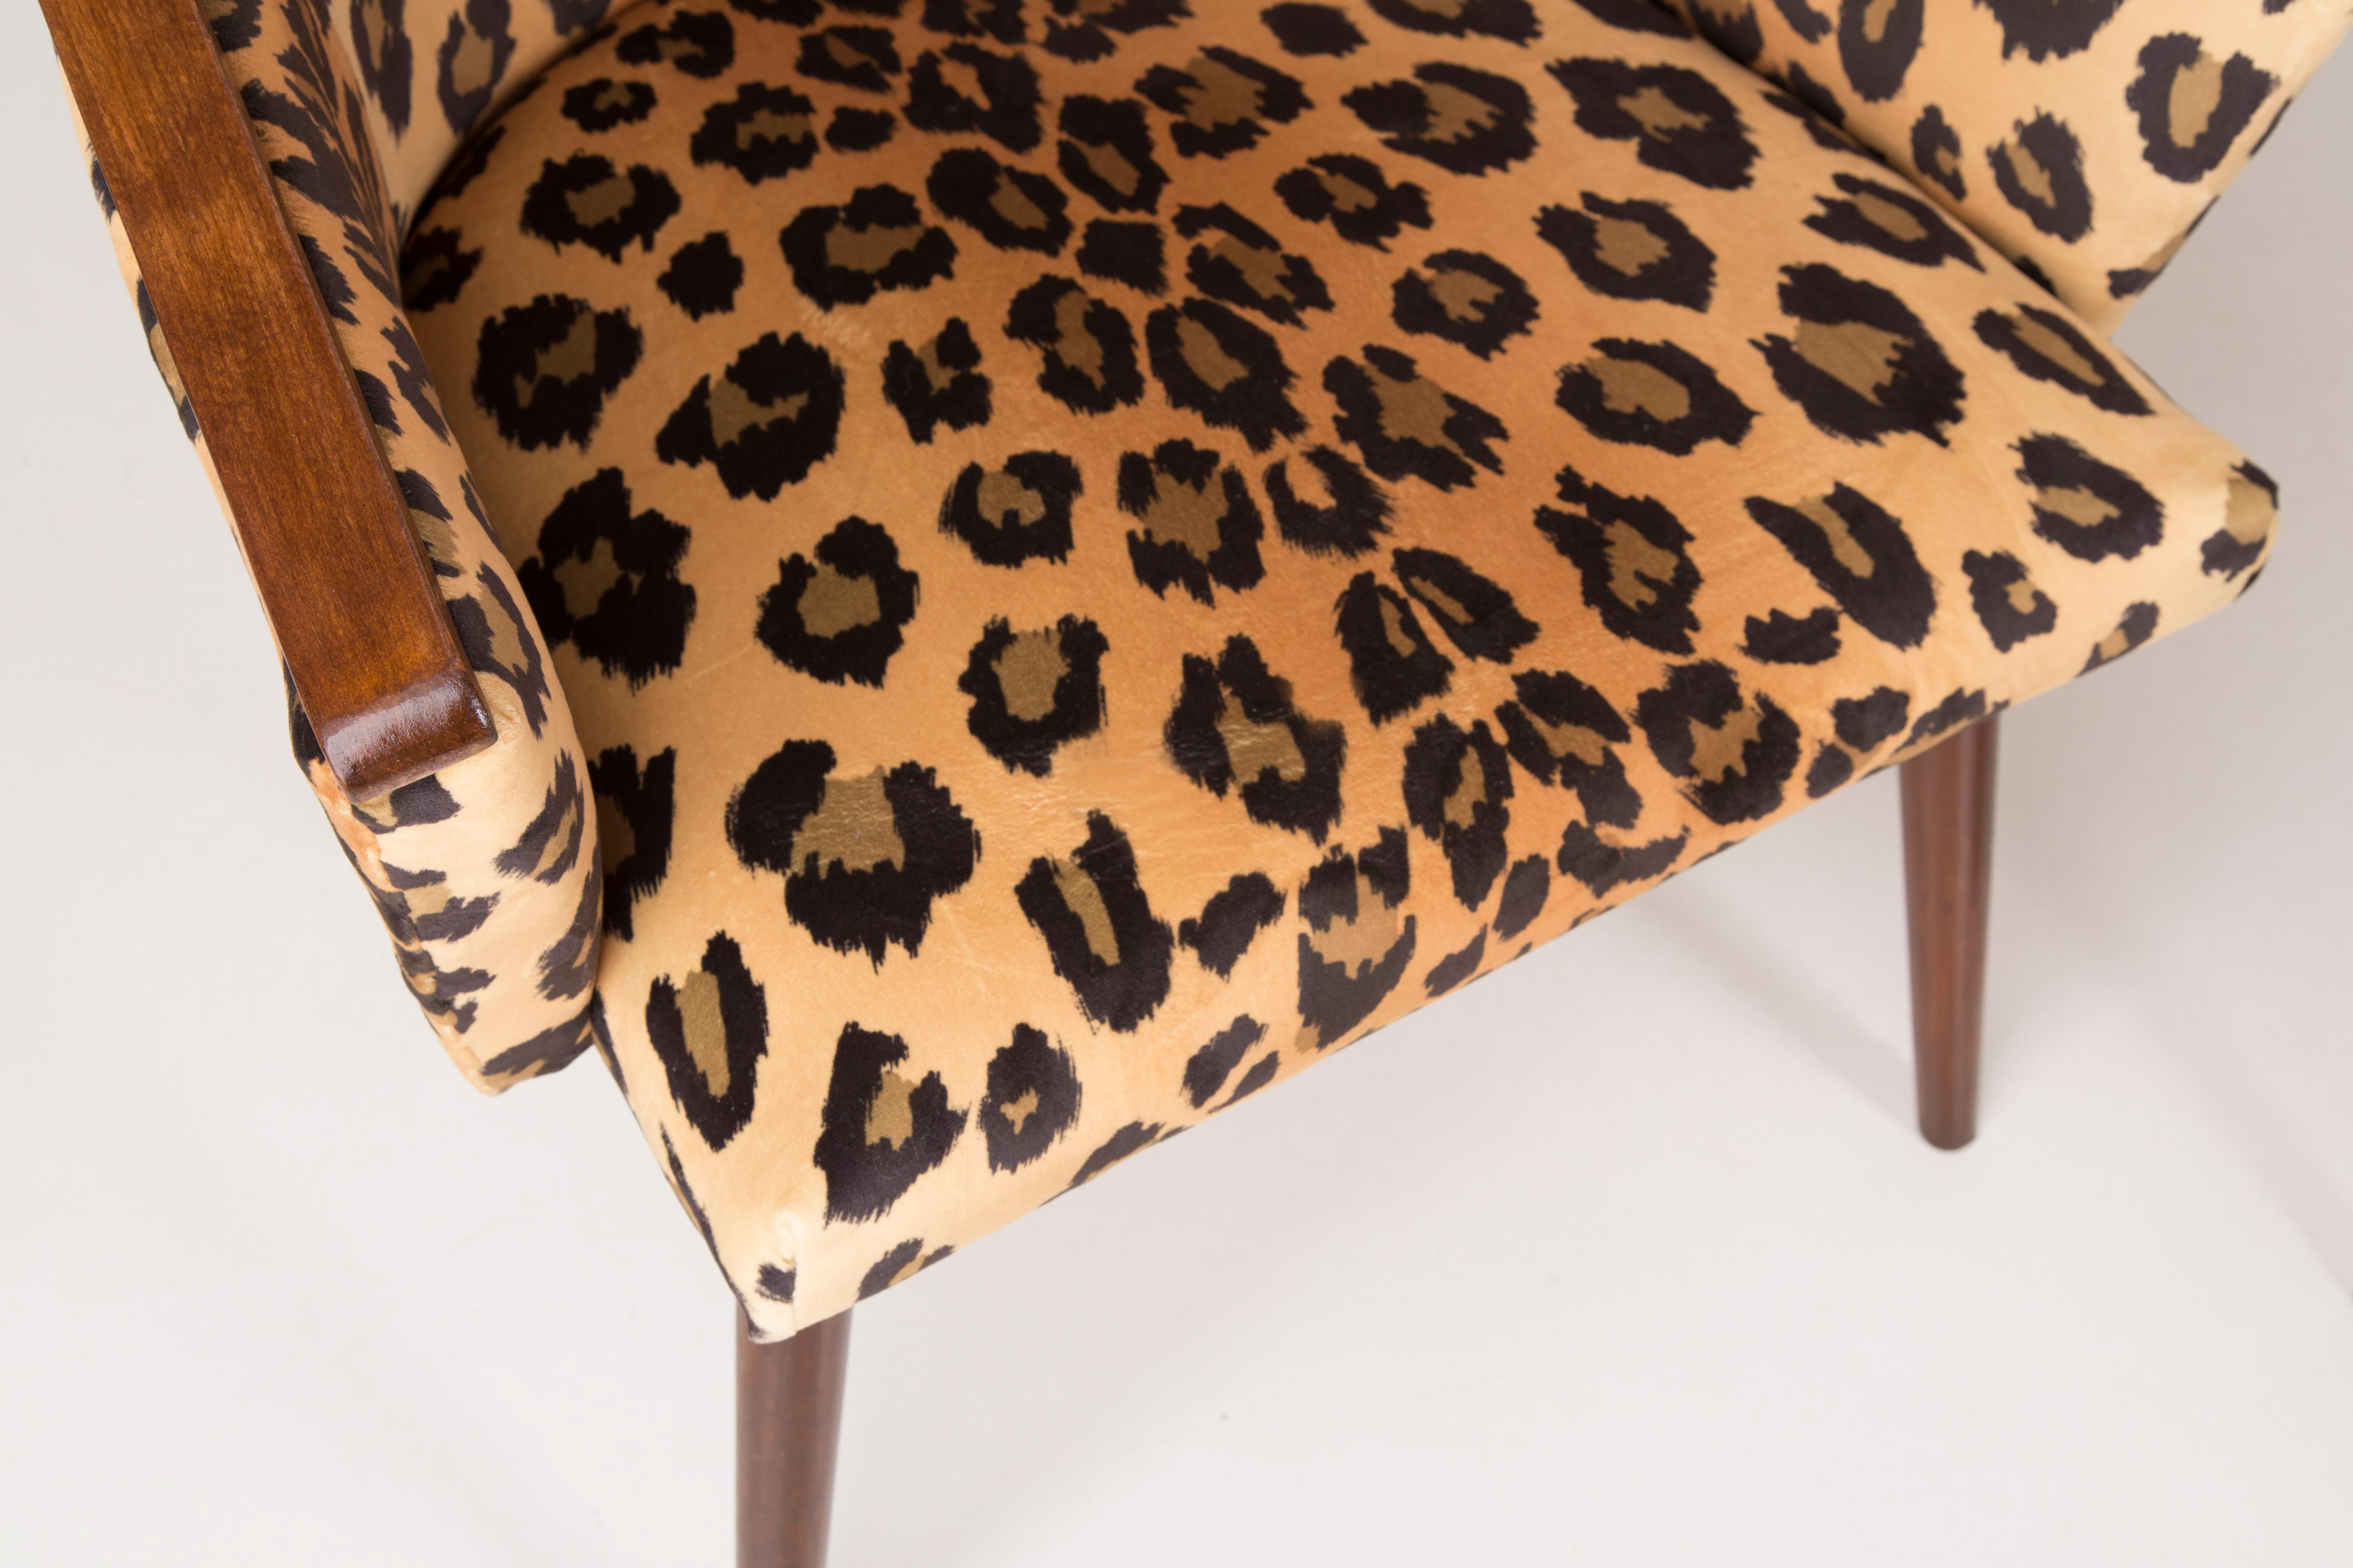 Hand-Crafted Set of Two Mid-Century Modern Leopard Print Chairs, 1960s, Germany